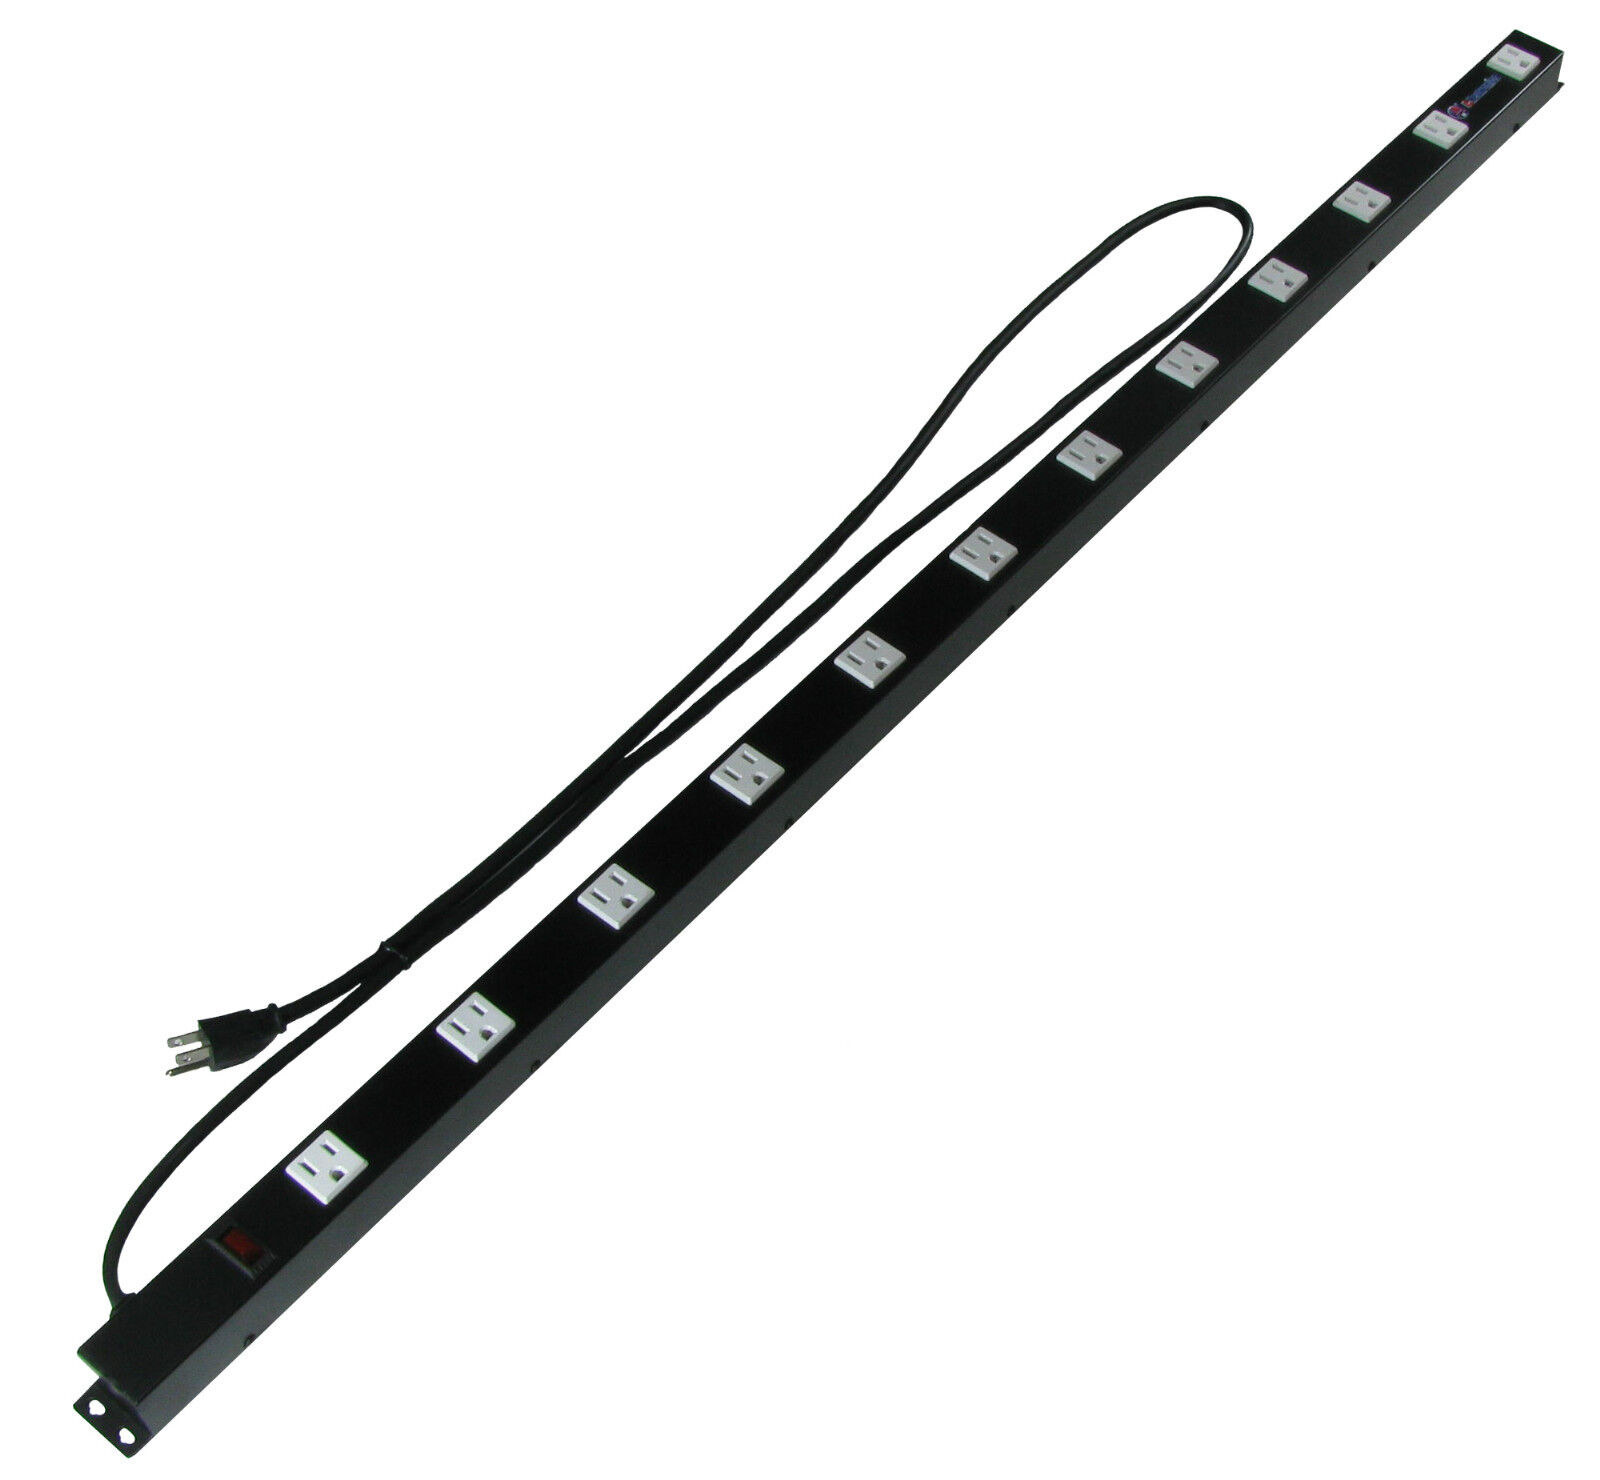 6 pieces of 48" 12 Outlet Metal Power Strip Surge Protected Lighted Power Switch A-Neutronics, Inc. ANI-1248SUR